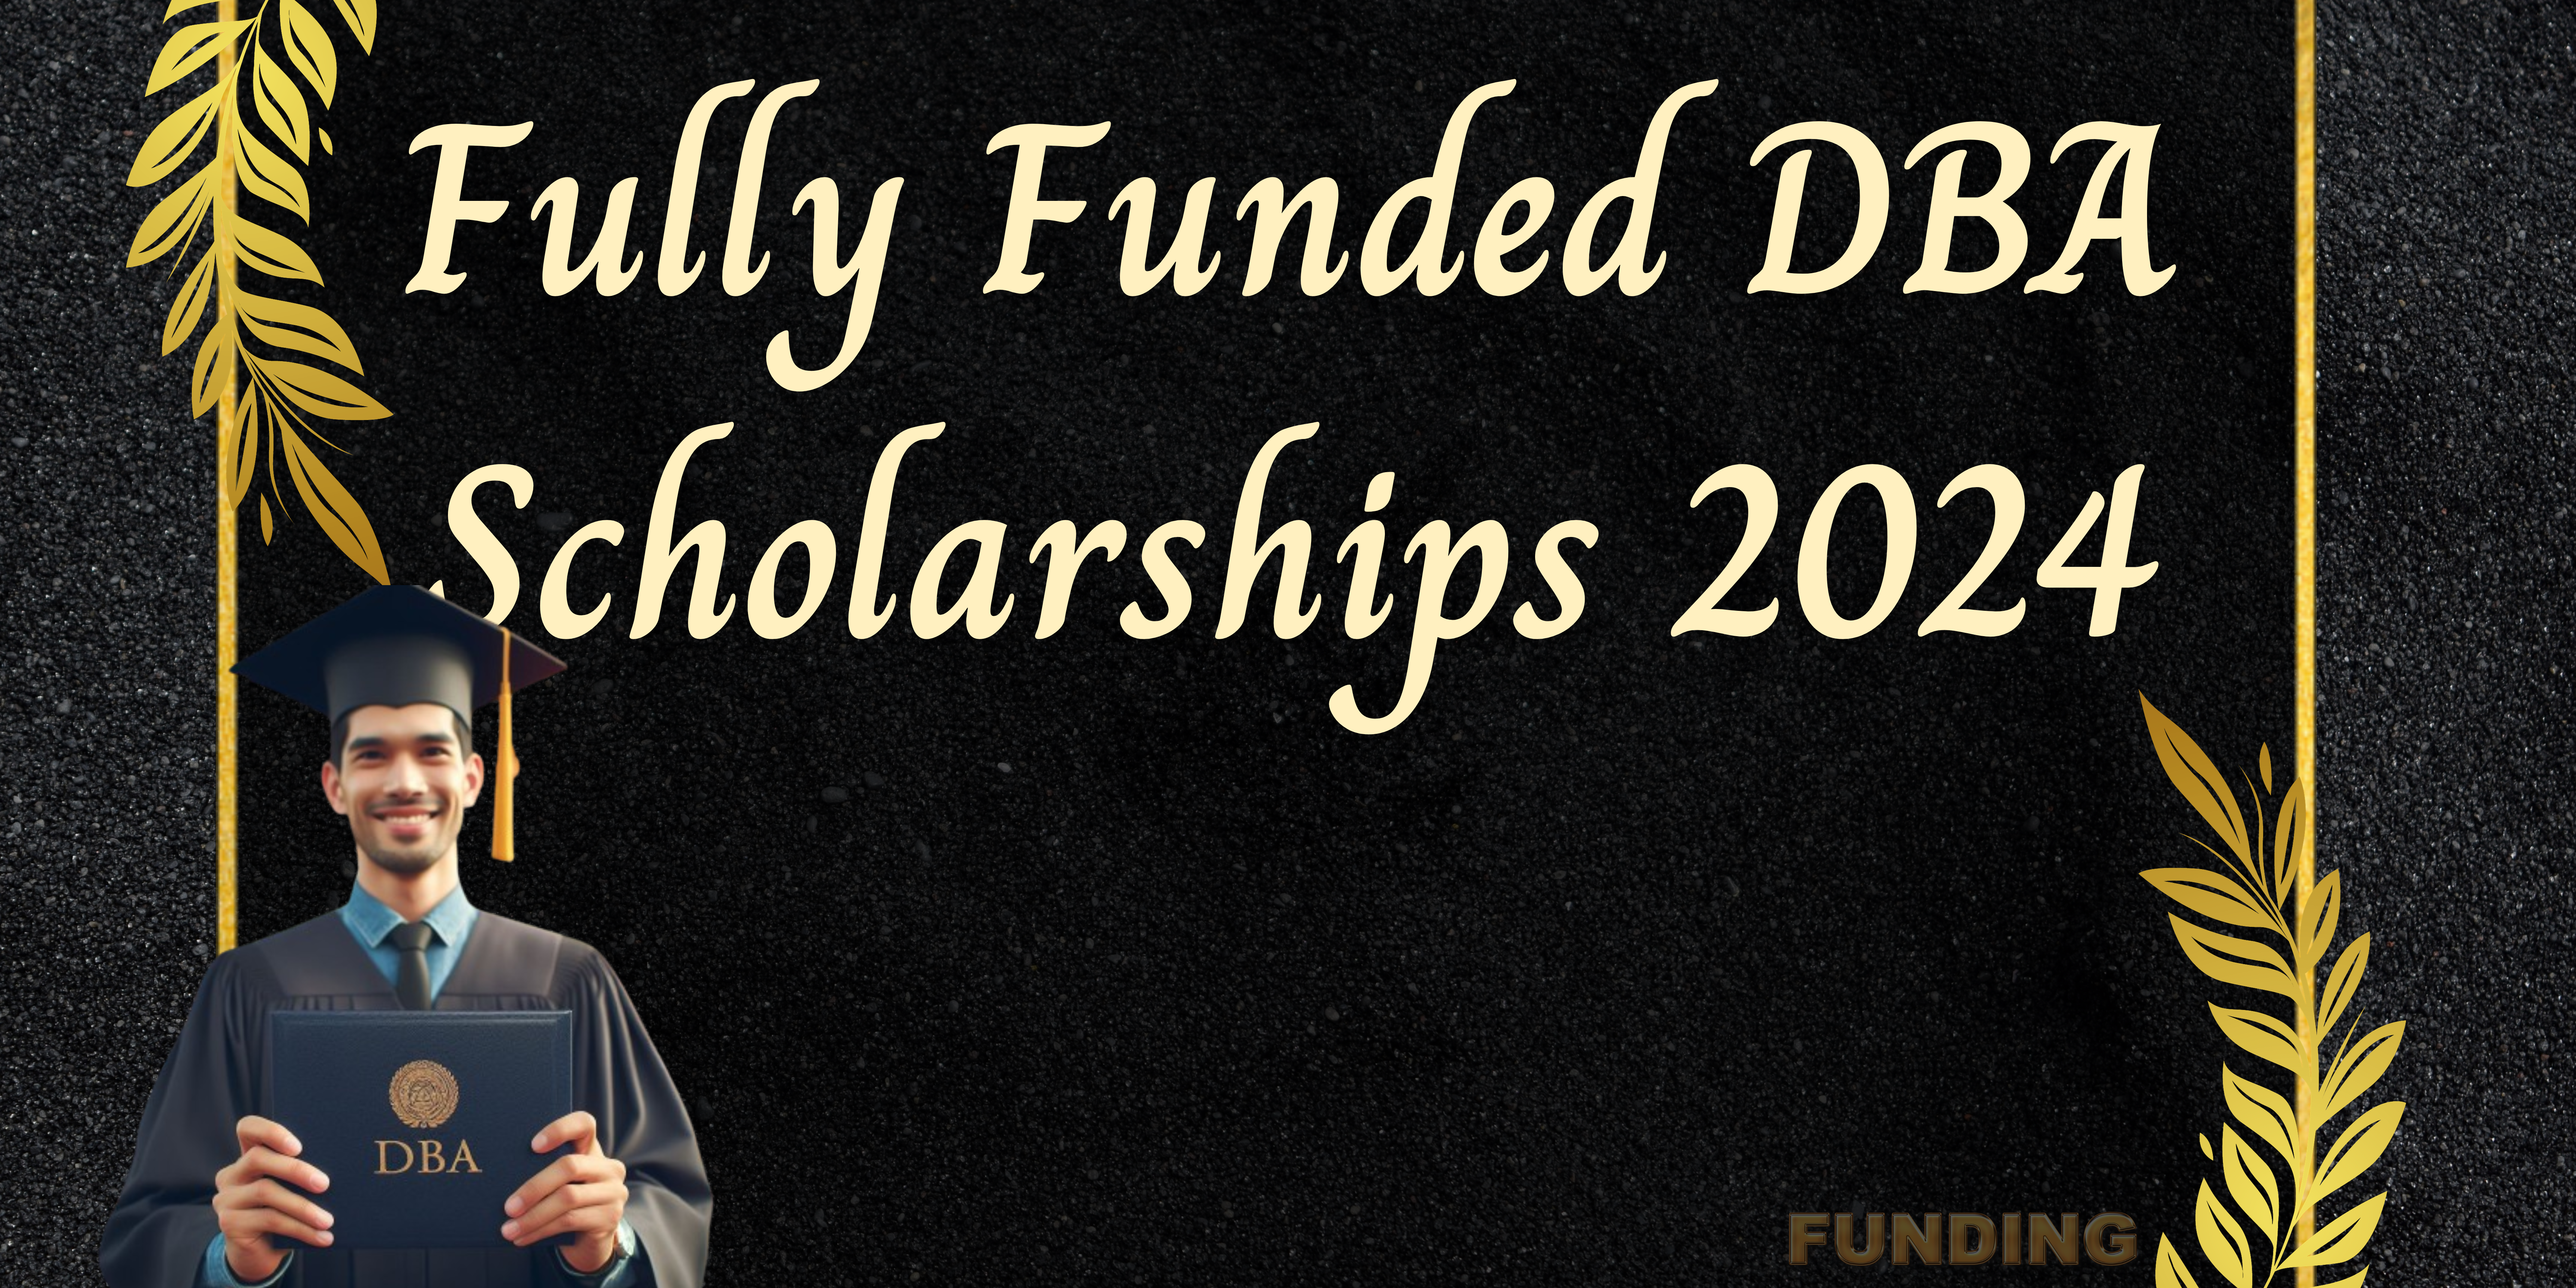 Fully Funded DBA Scholarships boldly written and illustrated on a flier, with a graduating recipient posing in front.